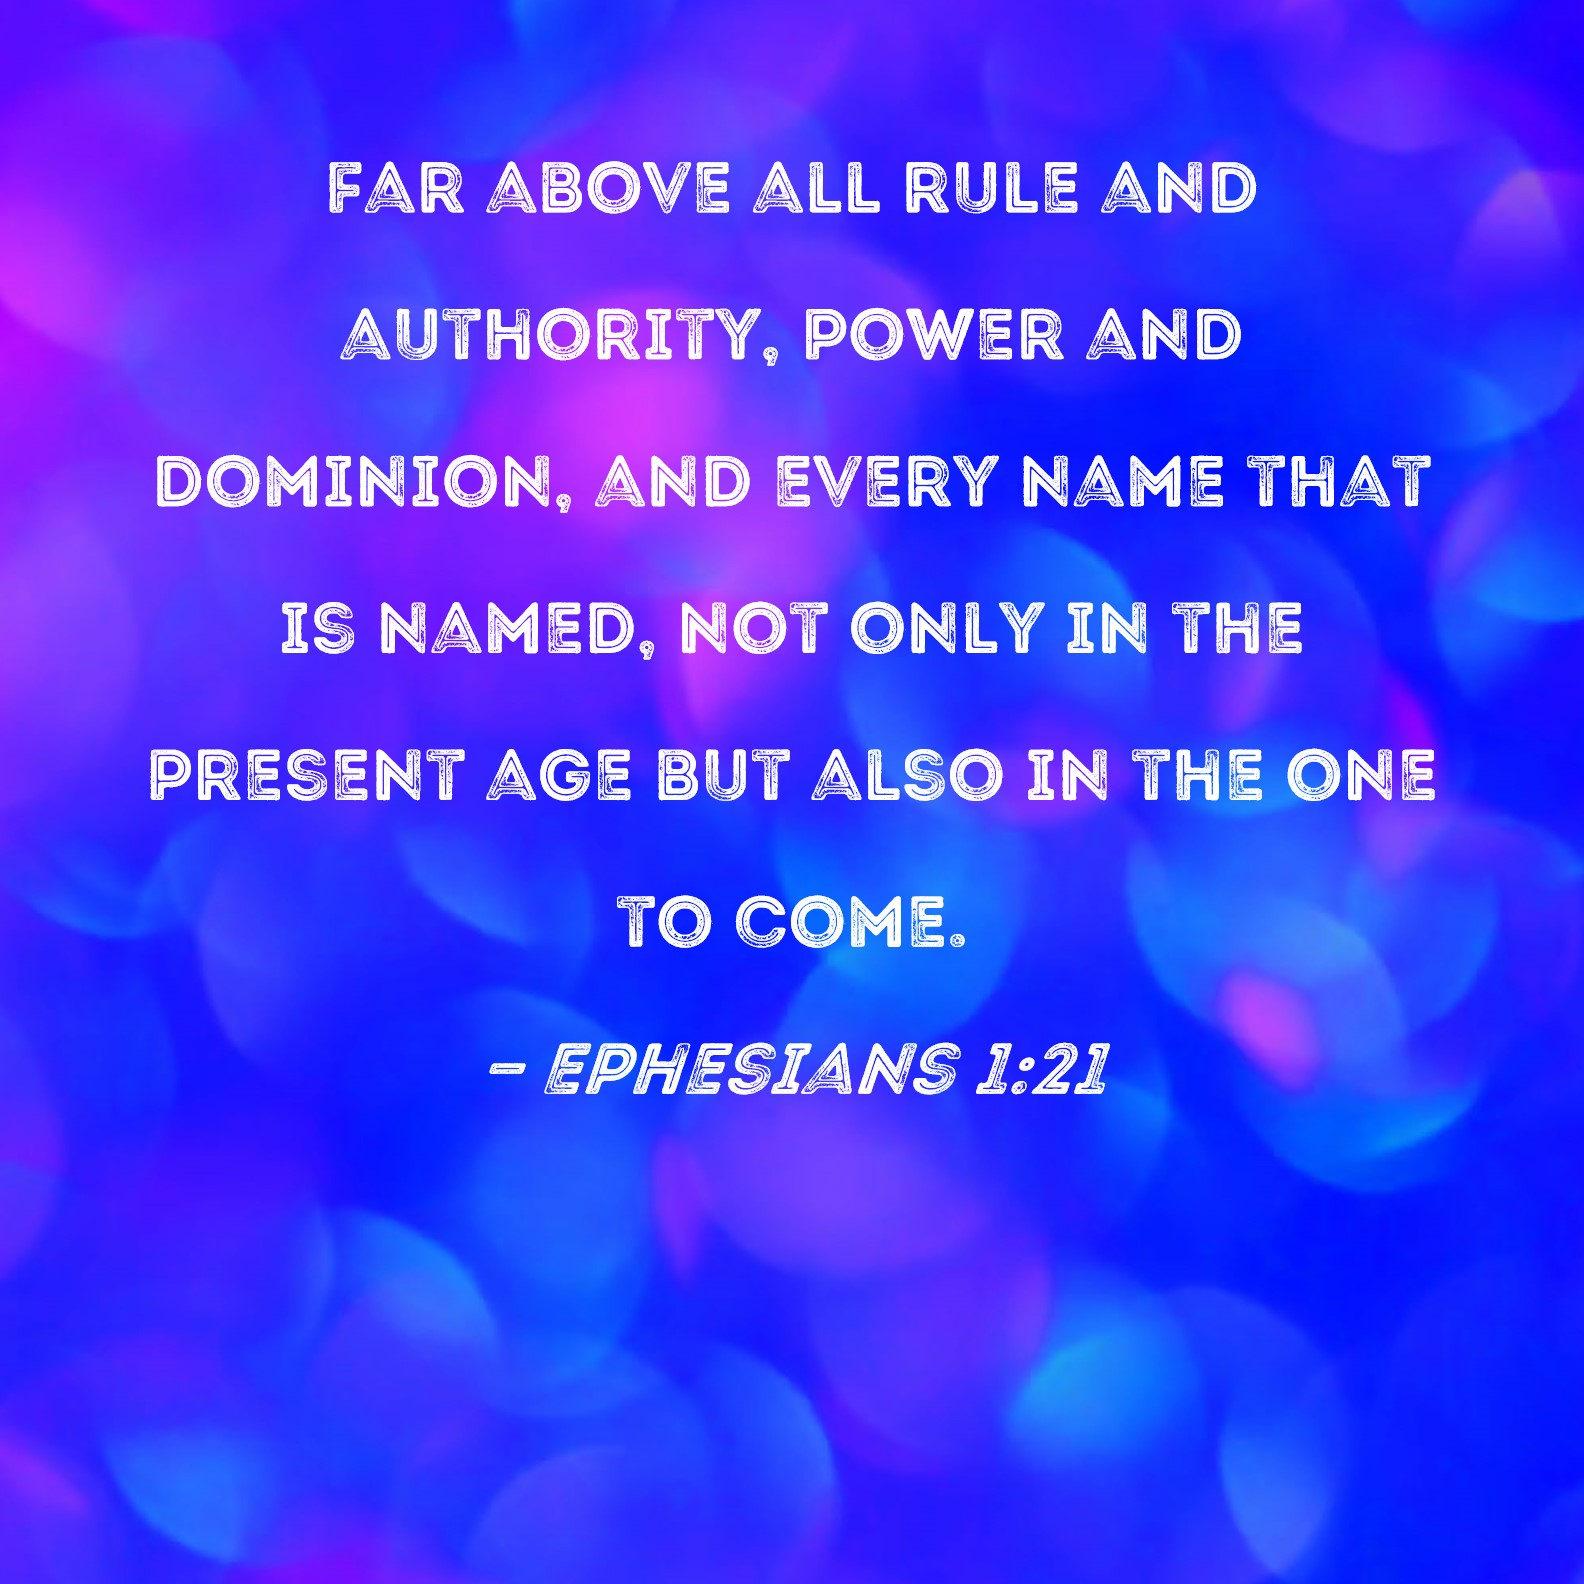 ephesians-1-21-far-above-all-rule-and-authority-power-and-dominion